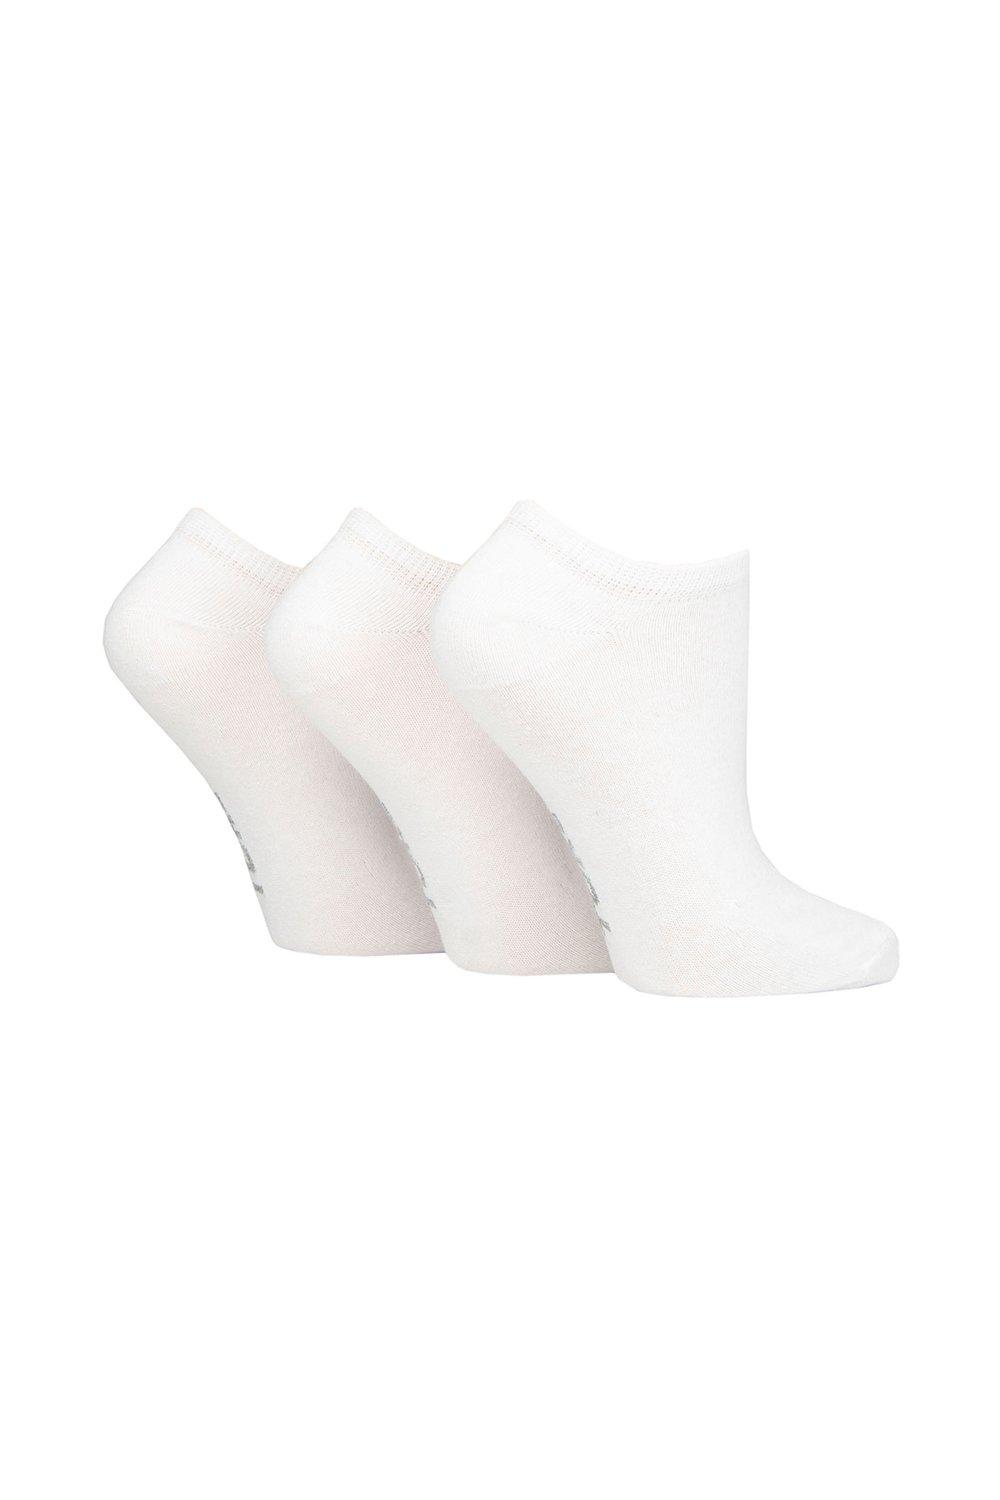 3 Pair 100% Recycled Plain Cotton Trainer Socks